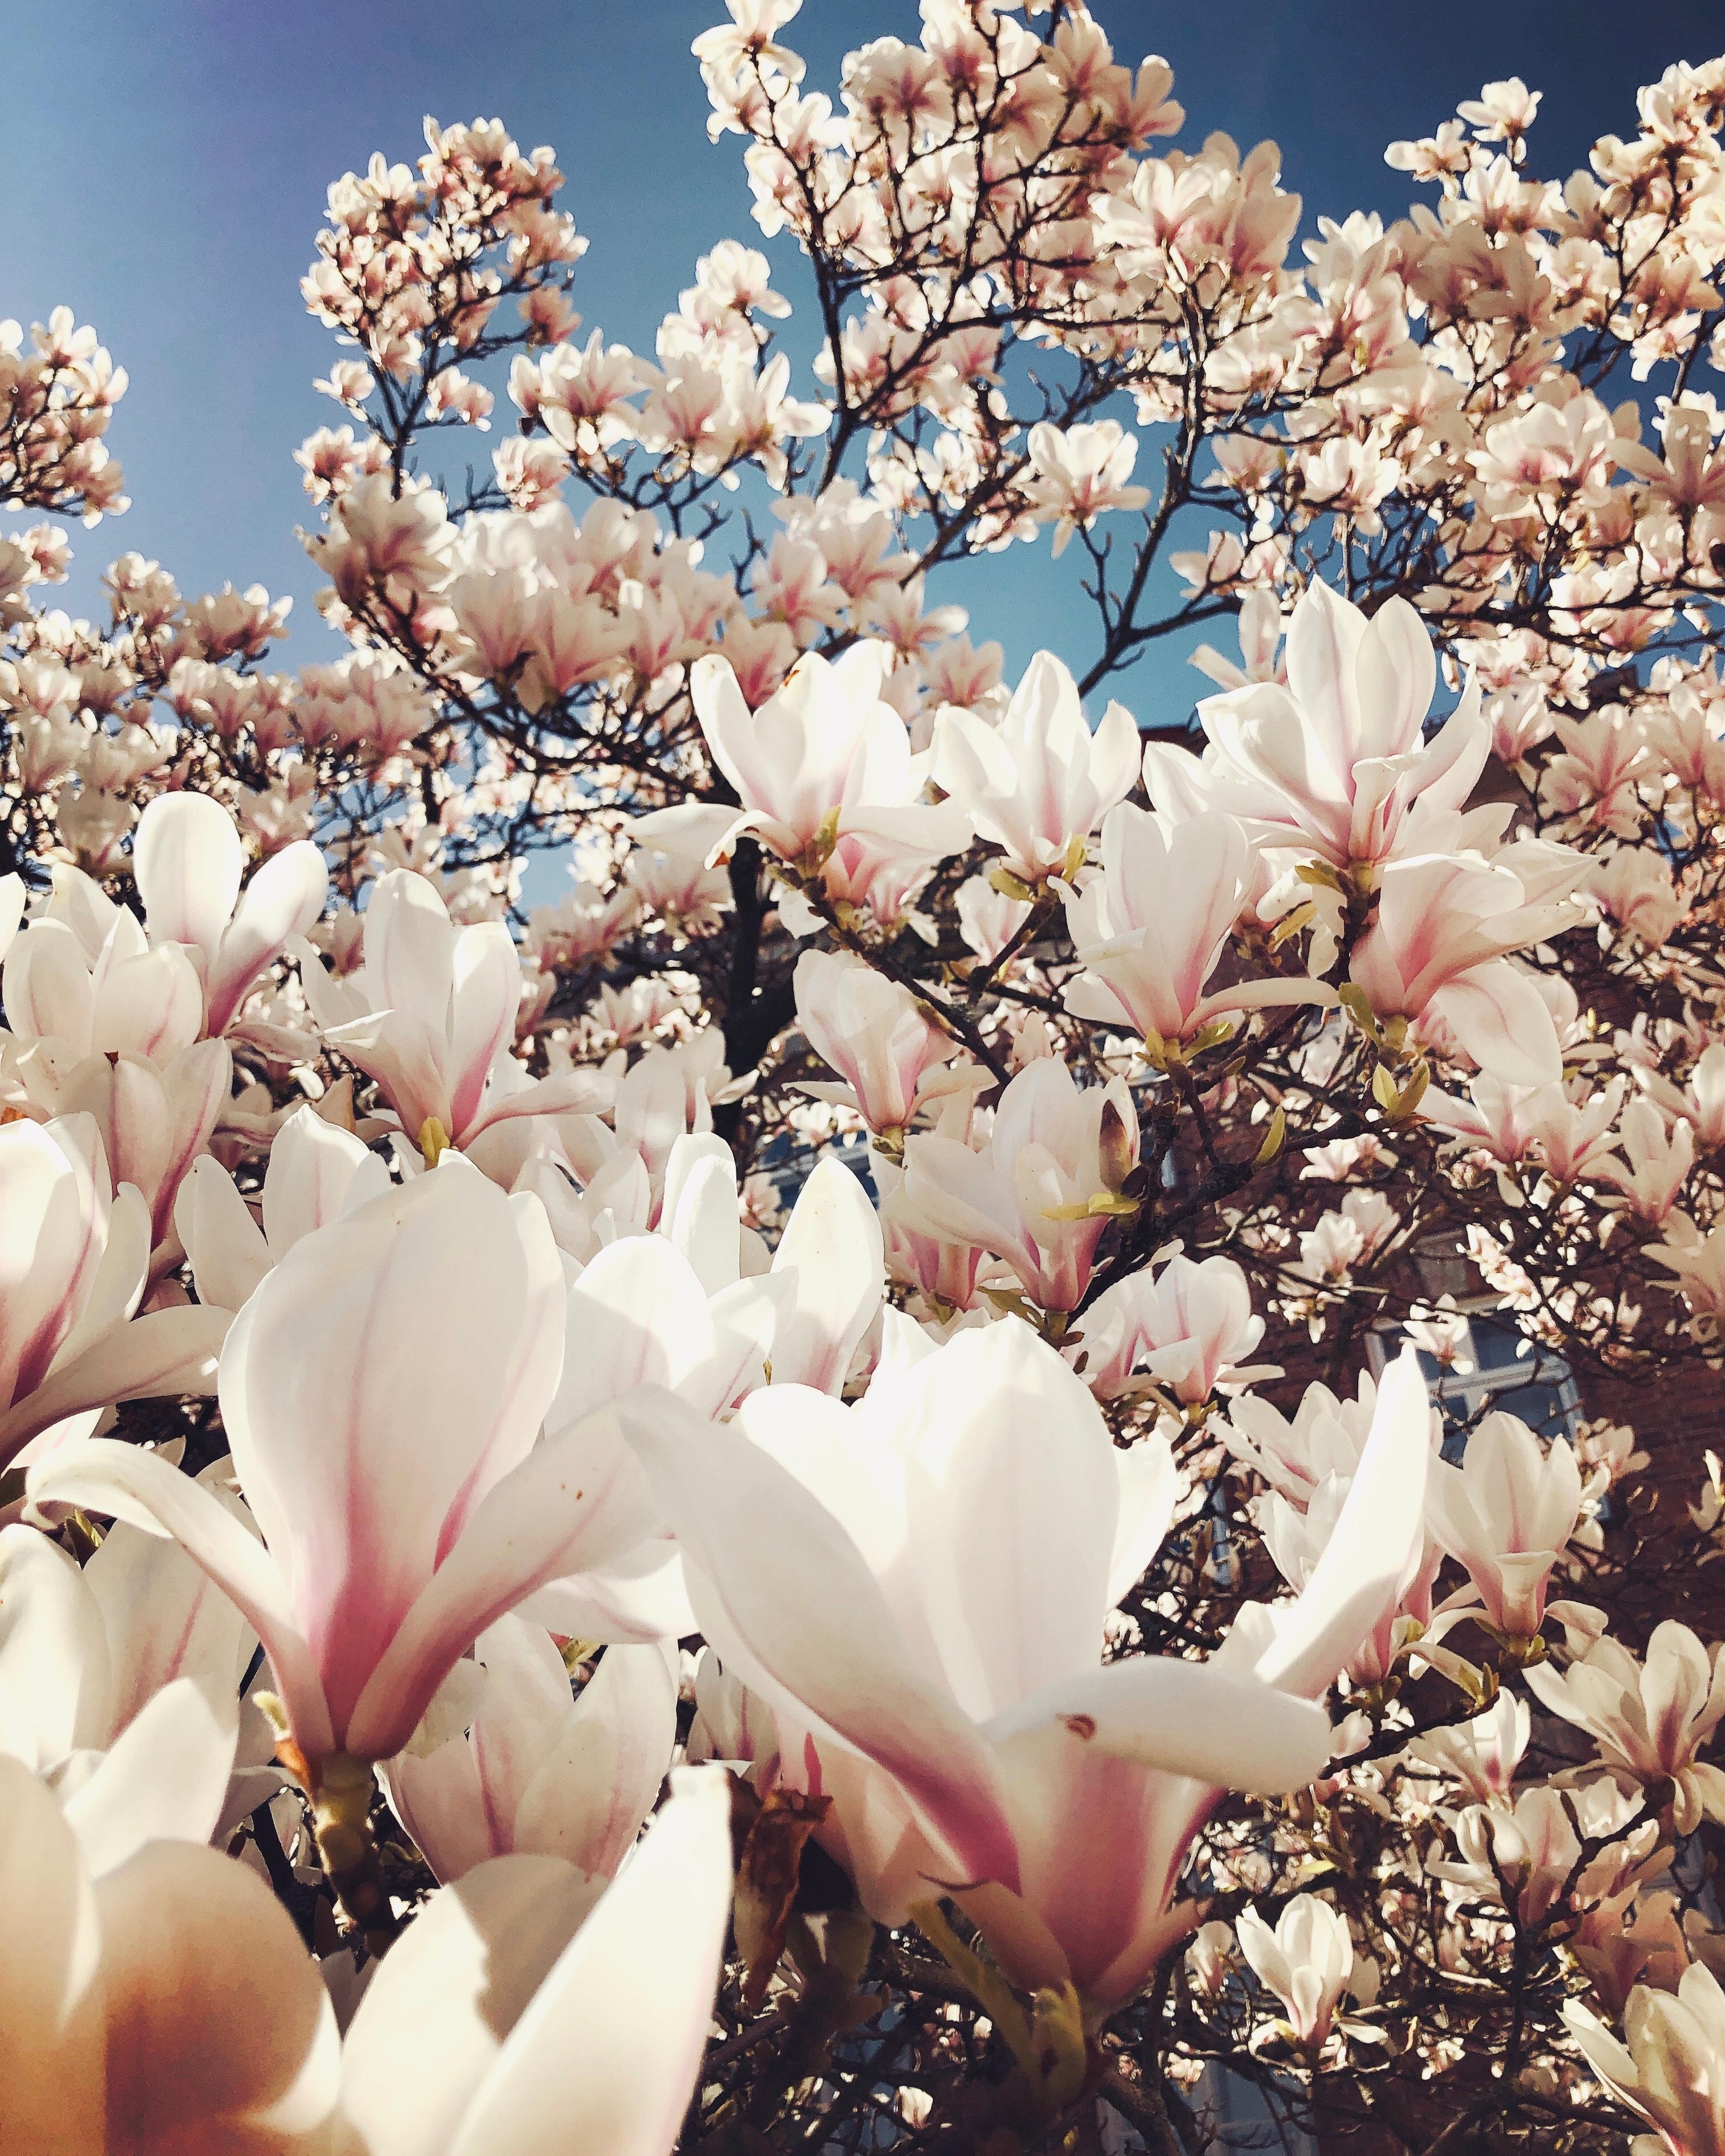 It's this time of the year... 🌸
#springblossom #magnolia #sunshine #staypositive #thelittlethings